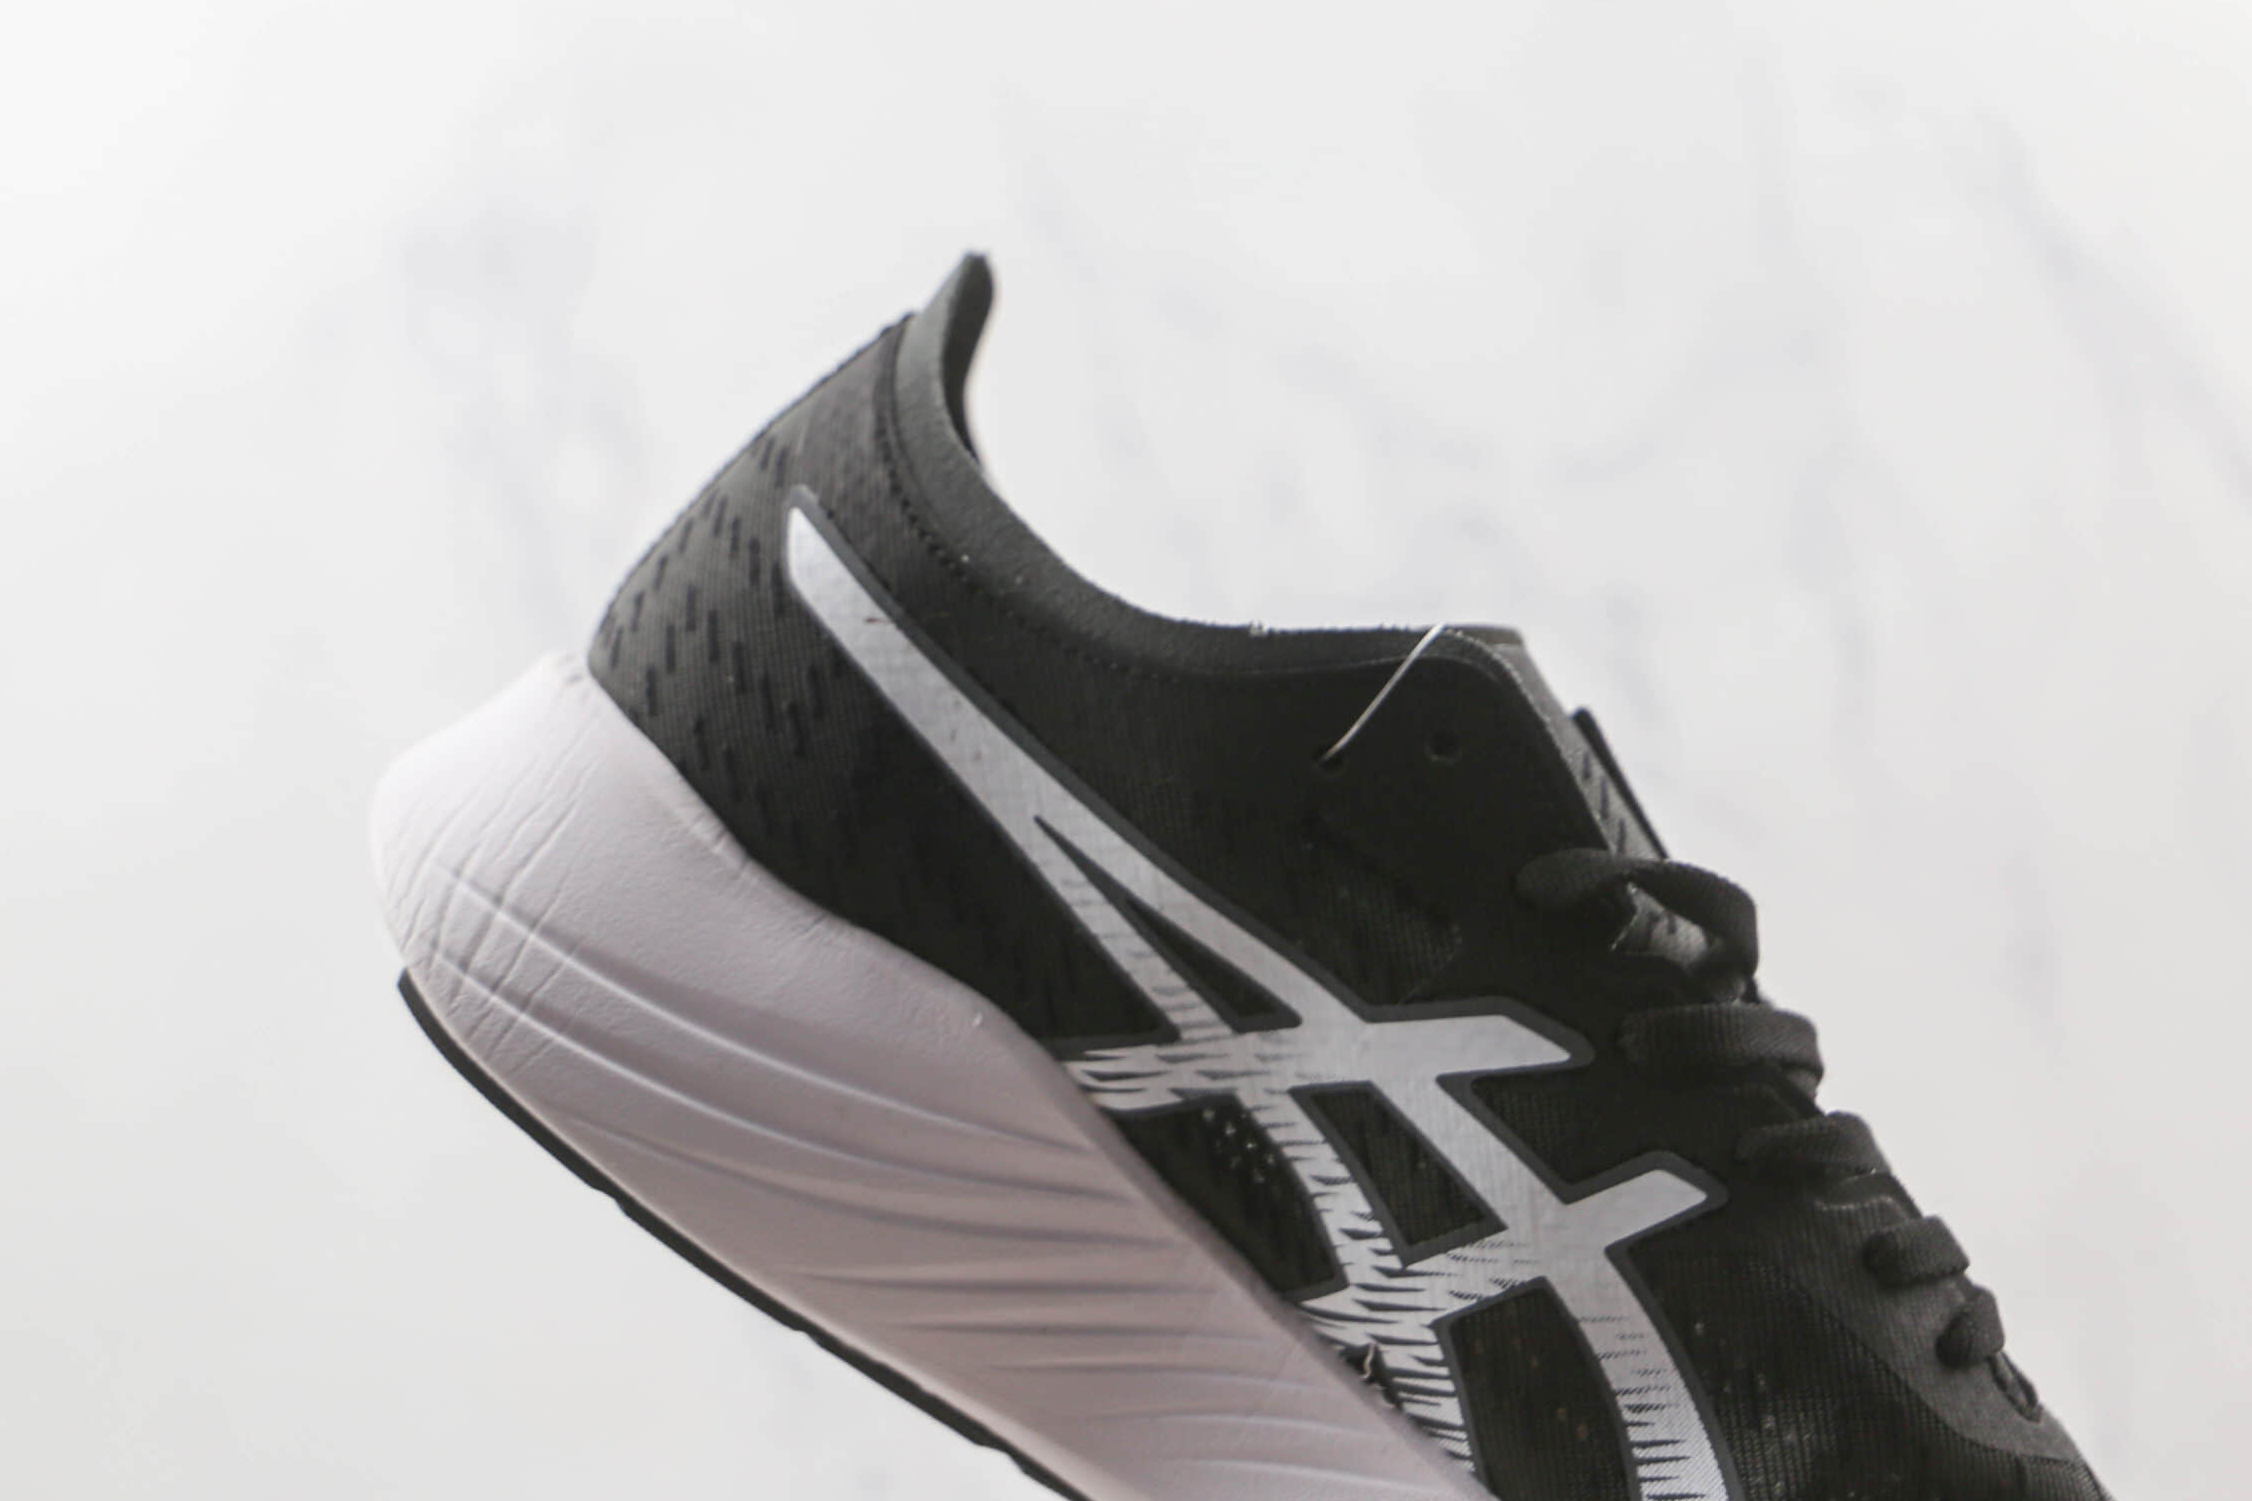 Asics Magic Speed Carbon 'Black White' 1012A895-001 | Shop Now for Fast-paced Running Performance